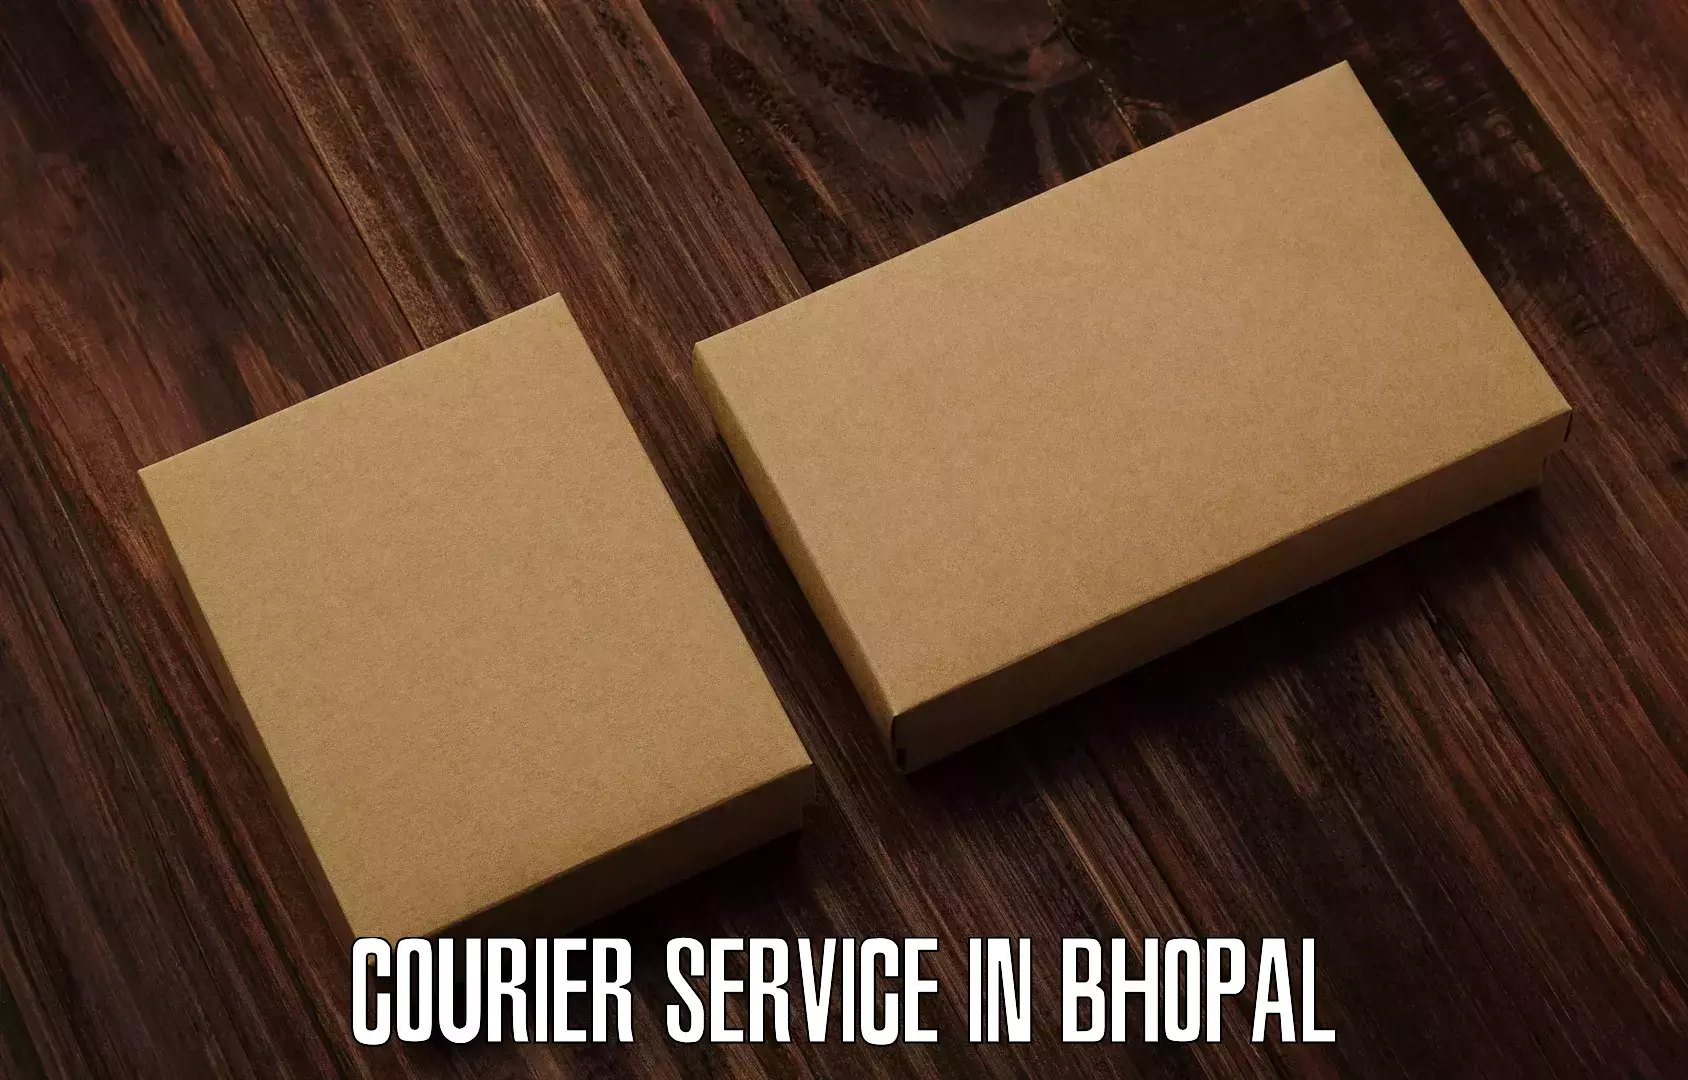 Express delivery capabilities in Bhopal